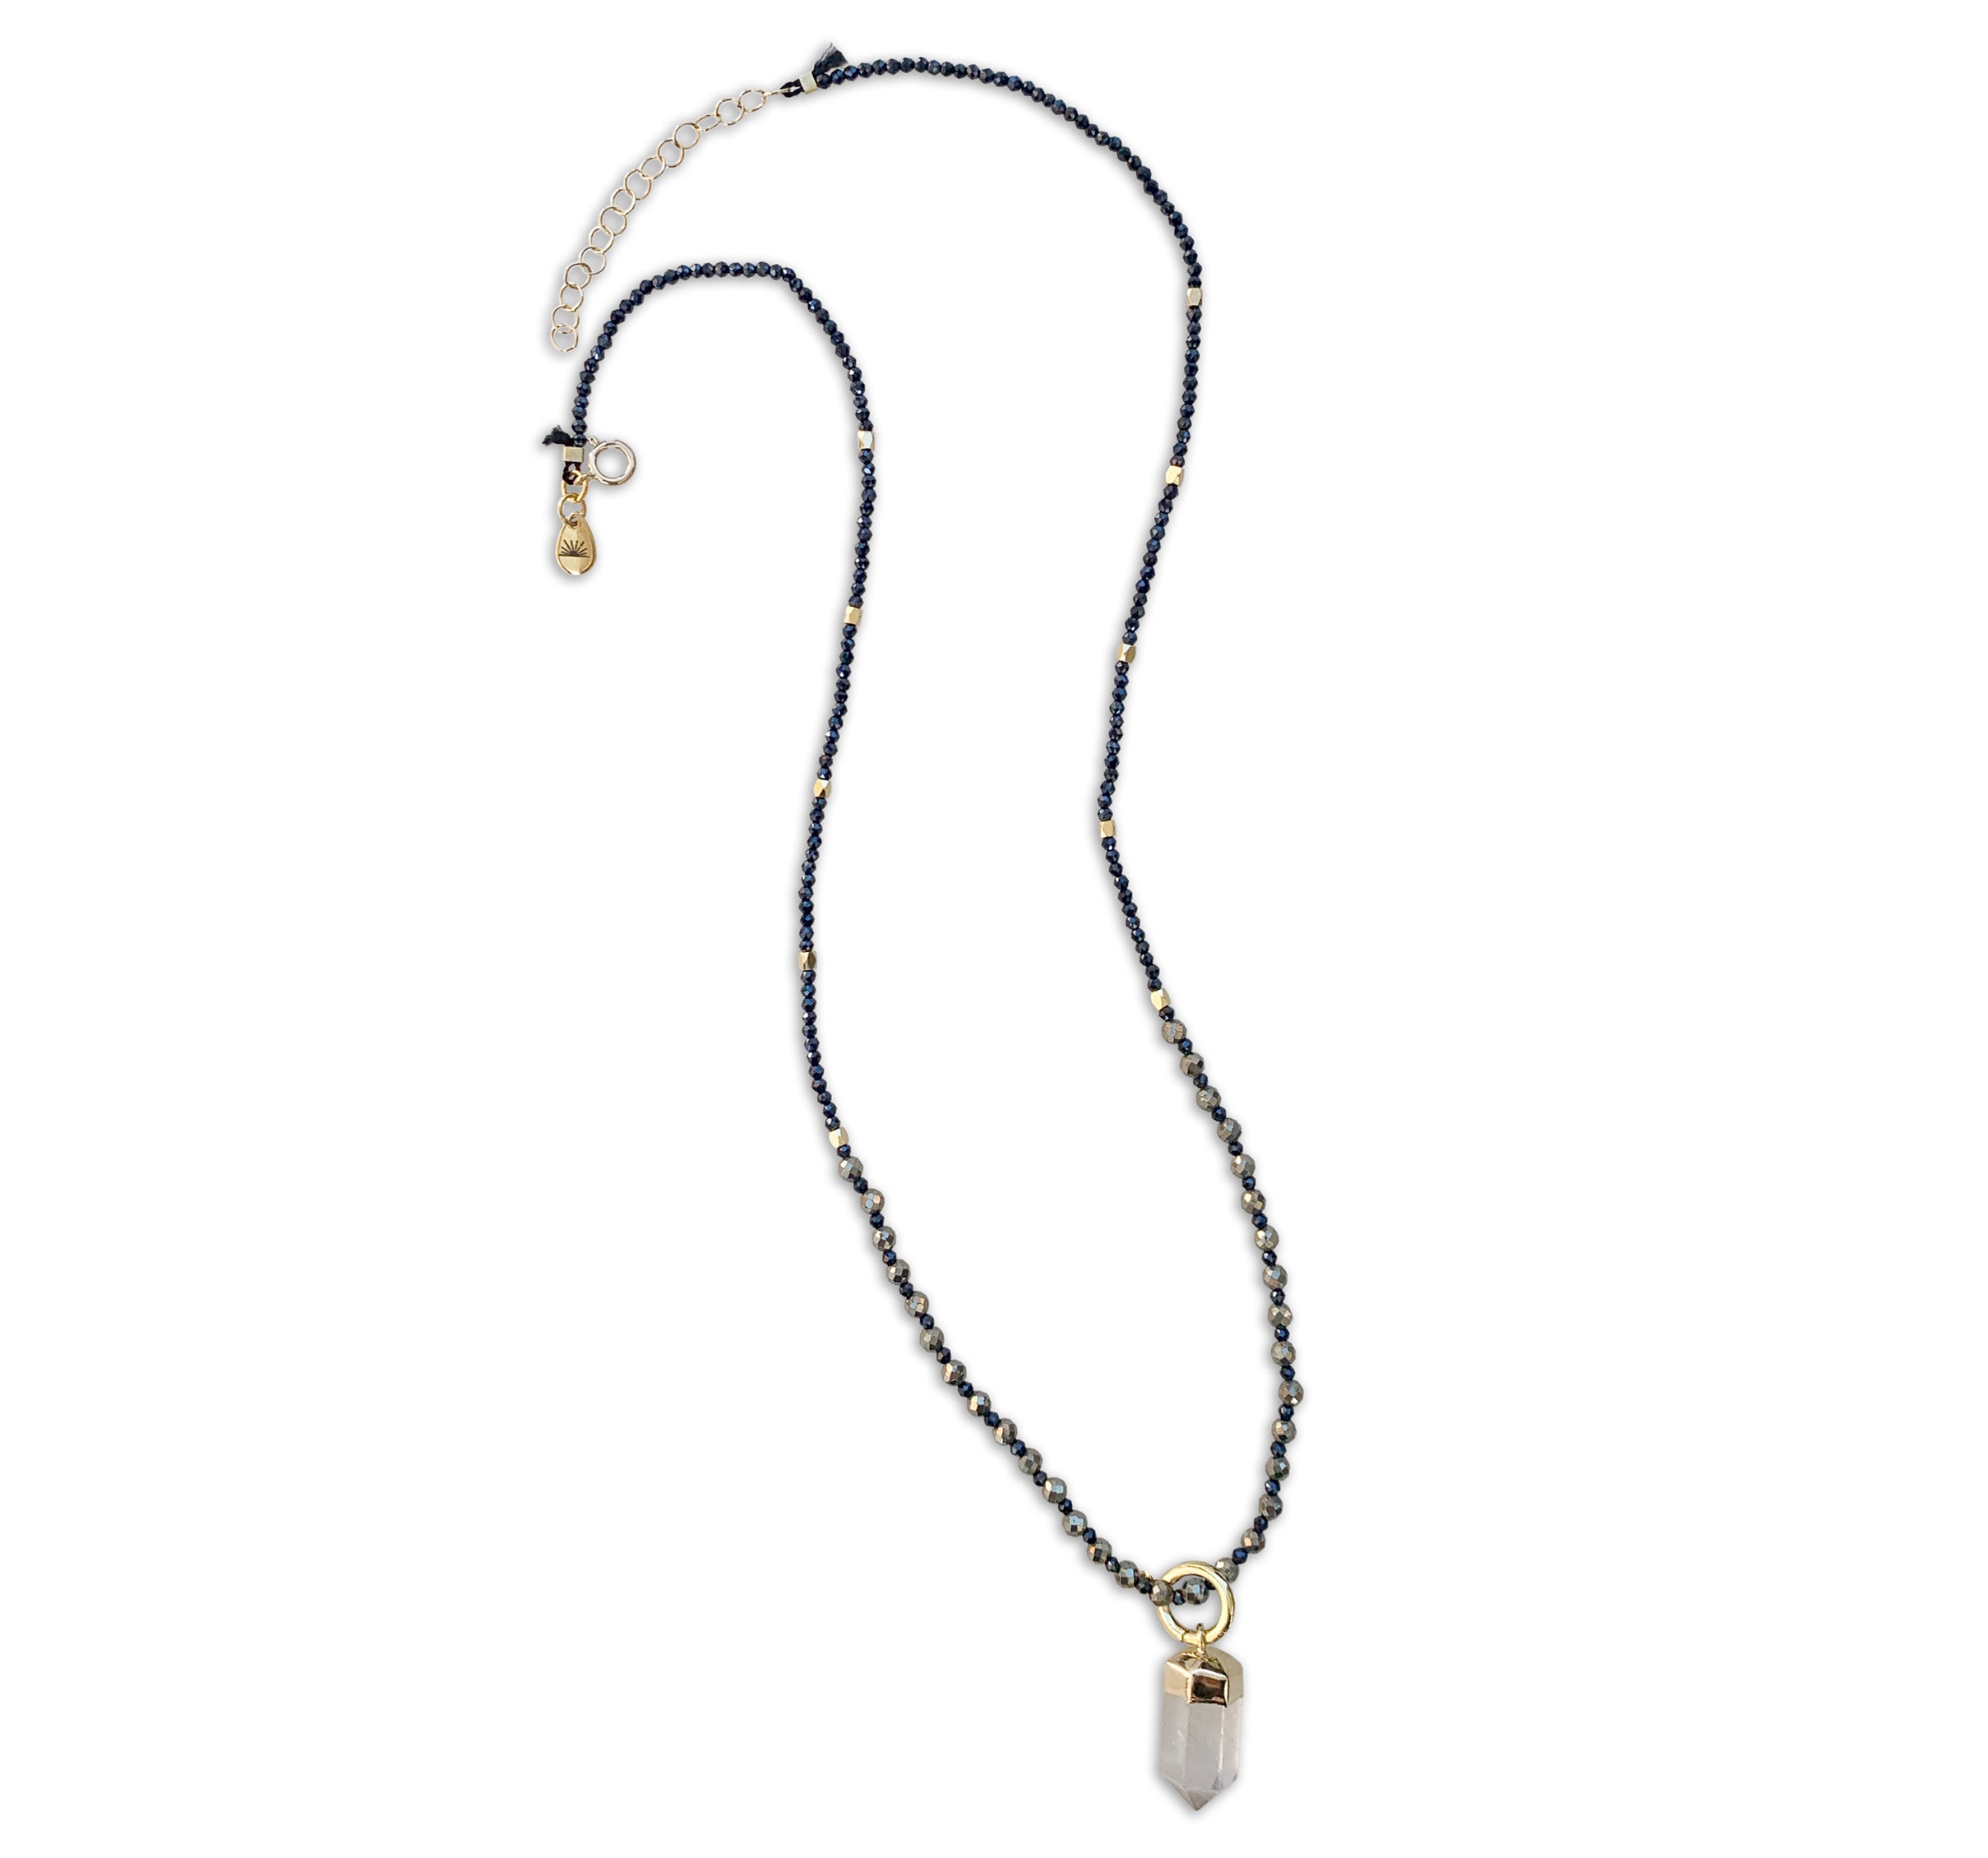 Cast-of-Stones-Pyrite-Necklace-with-Clear-Quartz-Crystal-Point-Charm